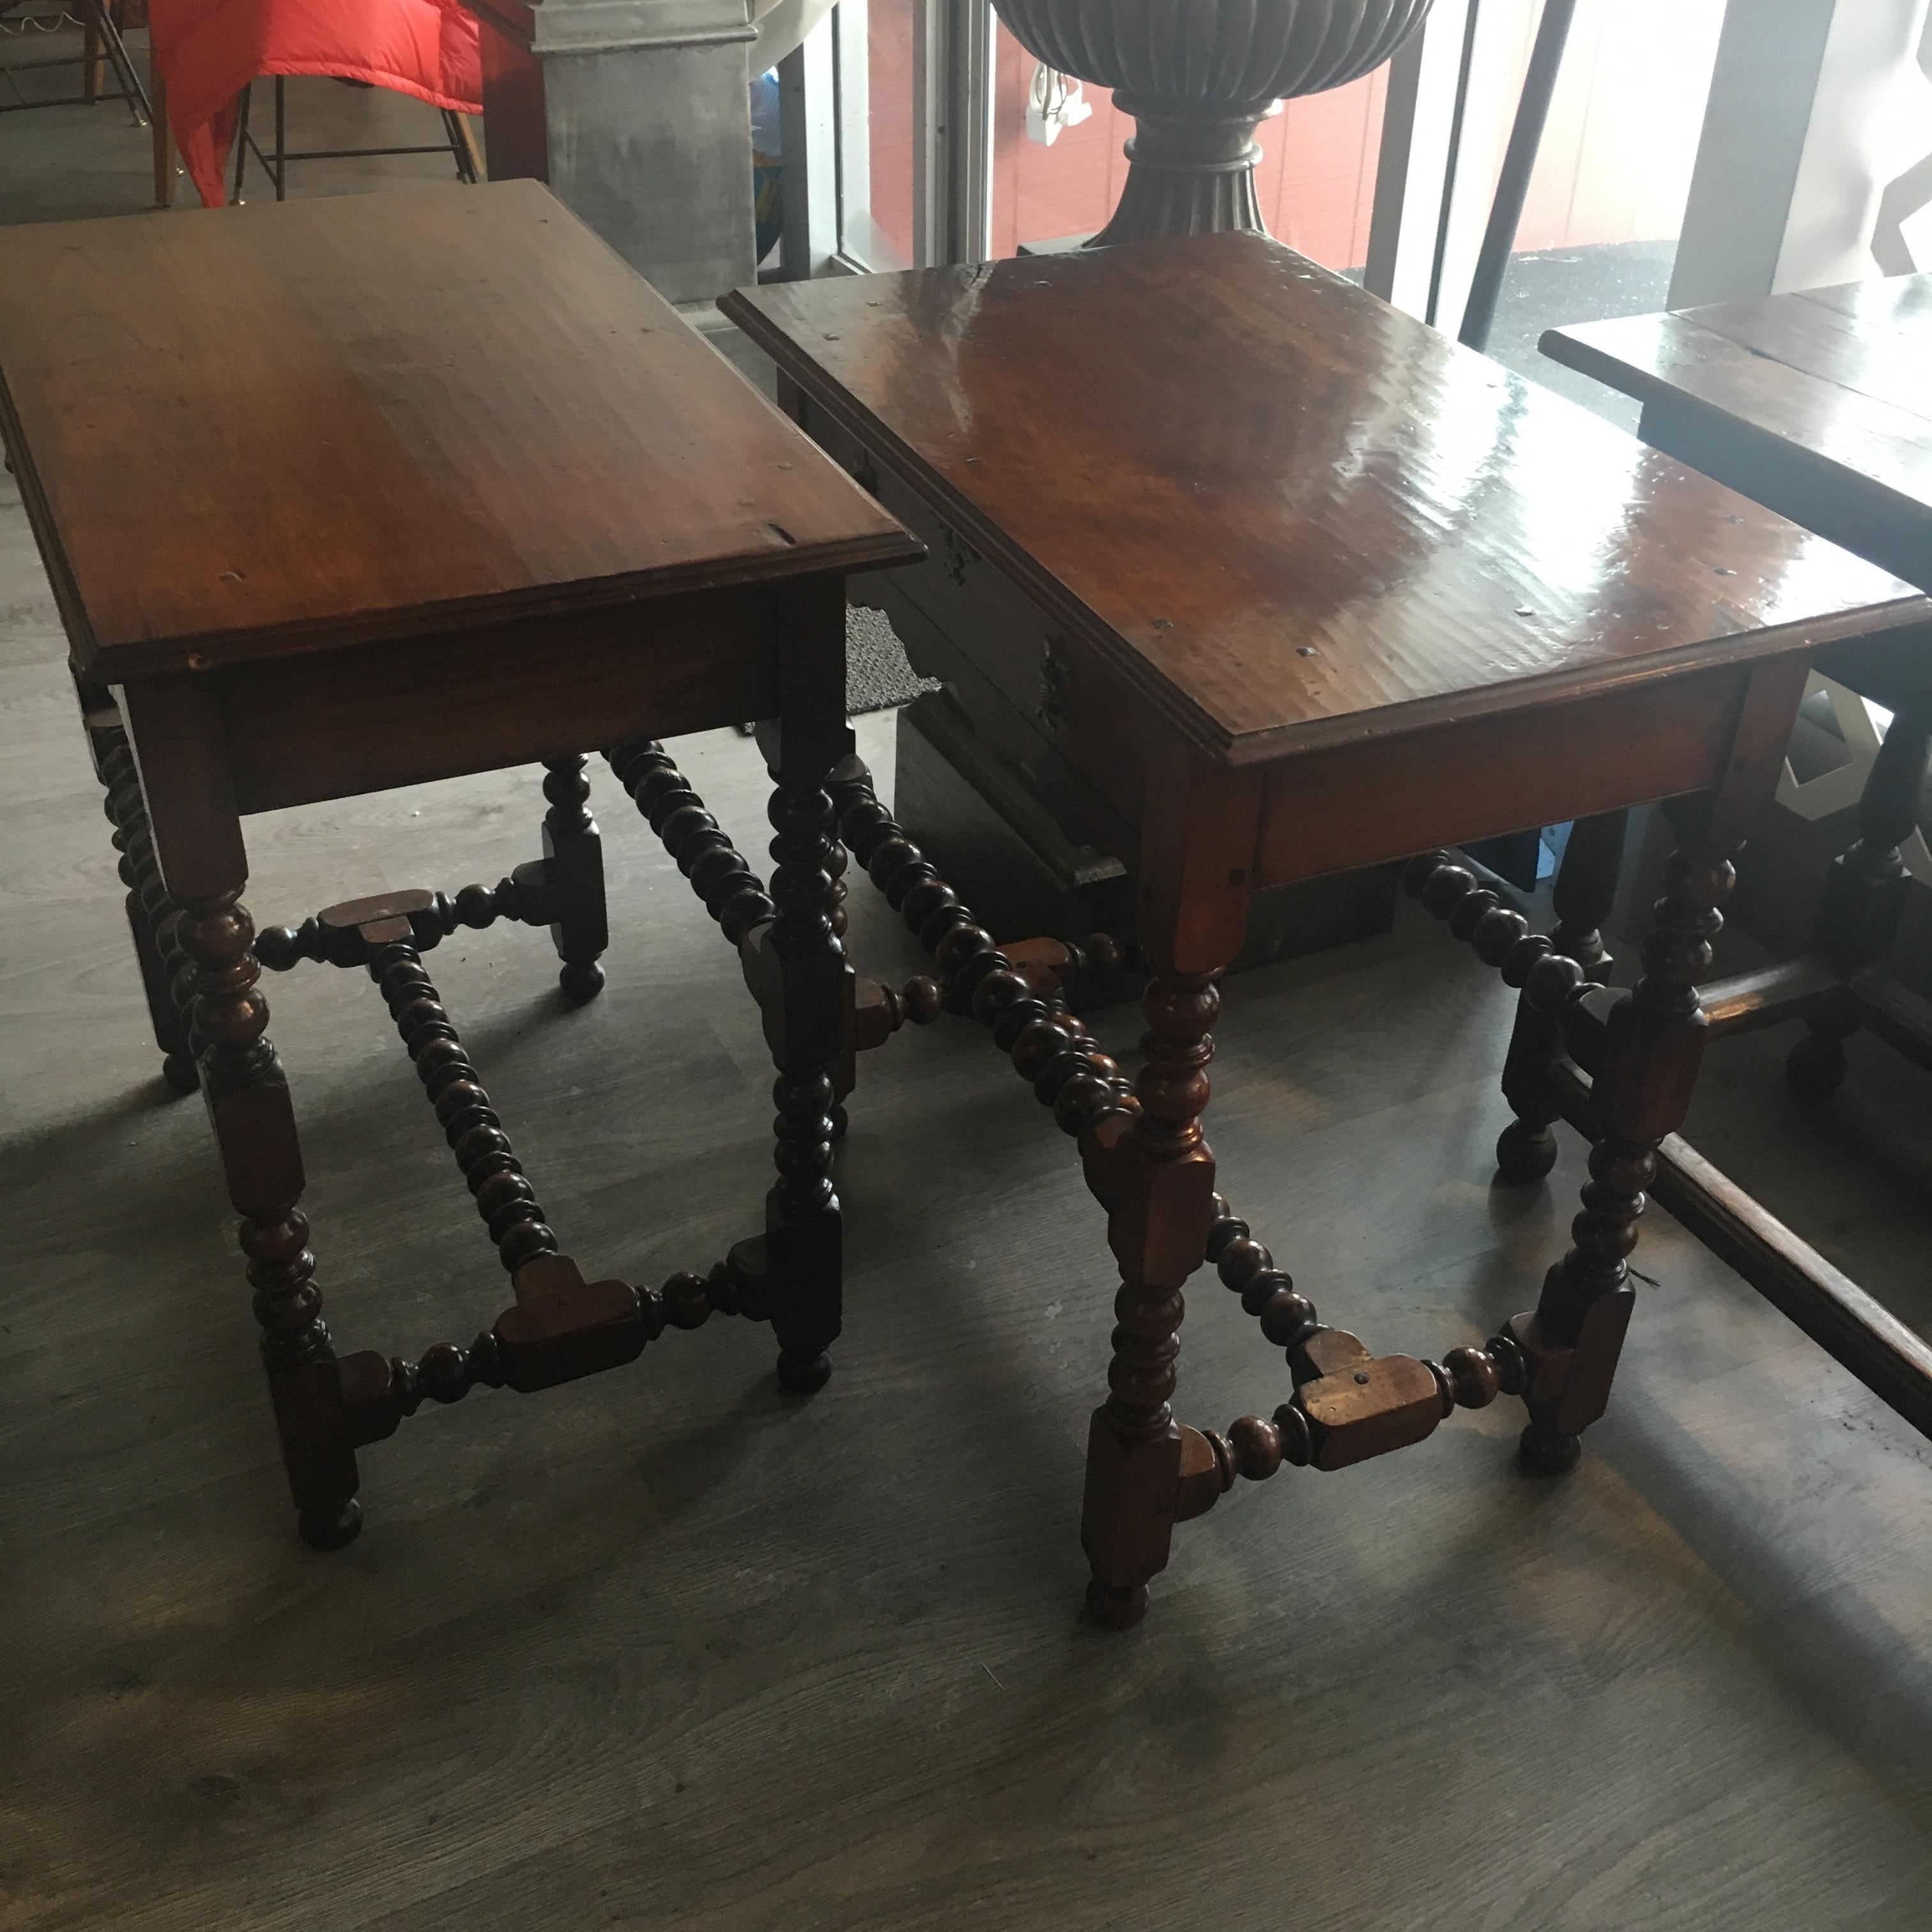 A pair of William and Mary style walnut side tables, great color and patina, priced per table, note the craftsmanship of hand hewned and pegged tops, dovetailed drawers, look like period pieces.